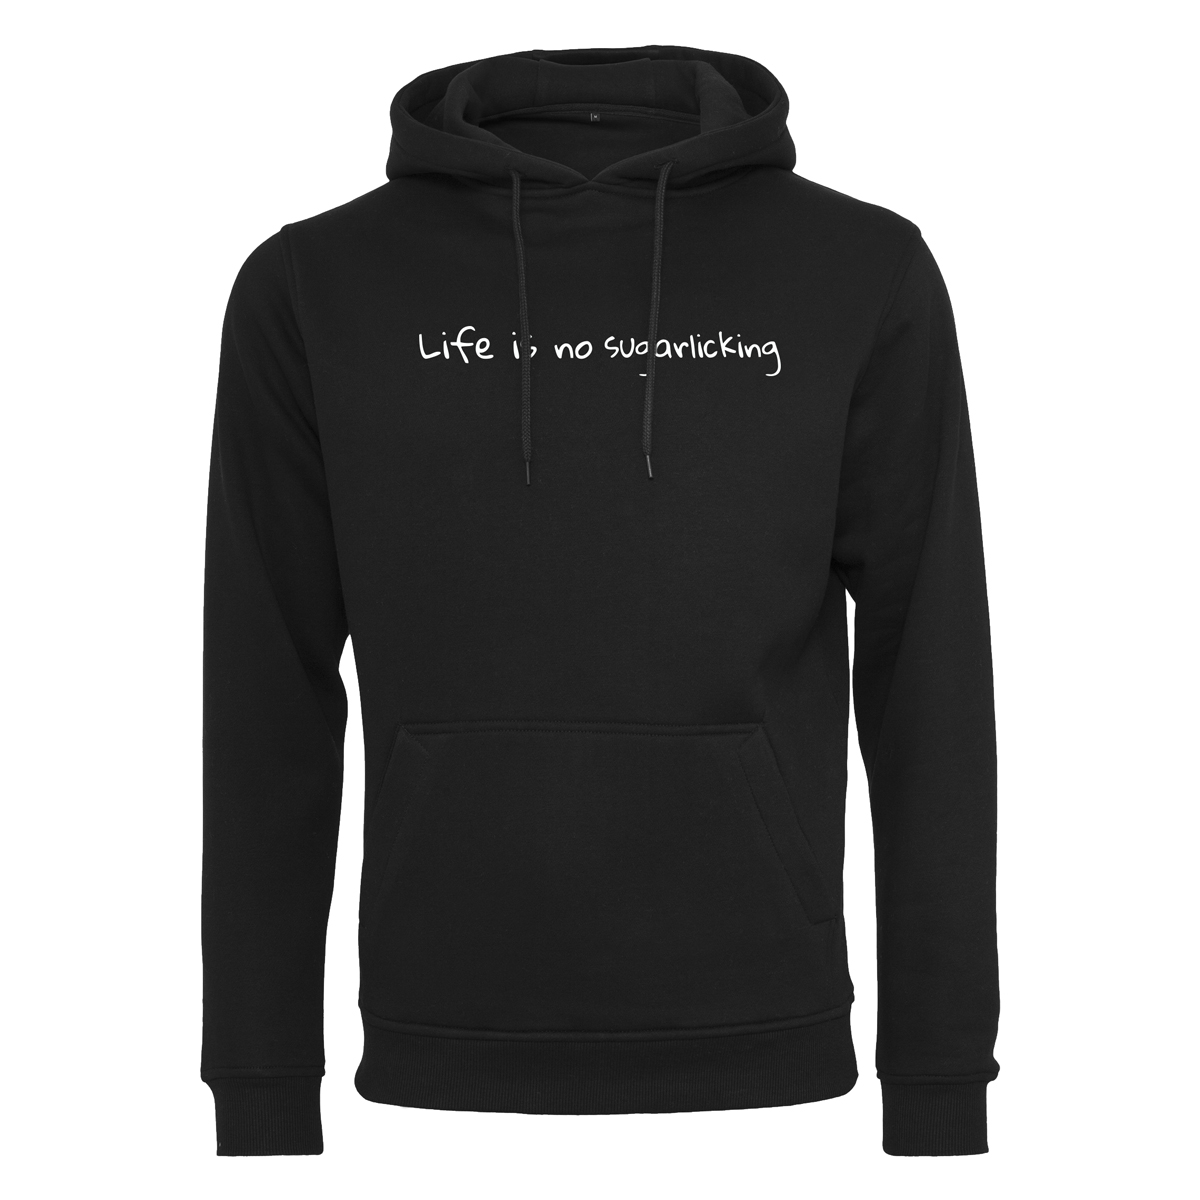 Life is no sugarlicking - Hoodie | Holla The Woodfairy | Merchandise